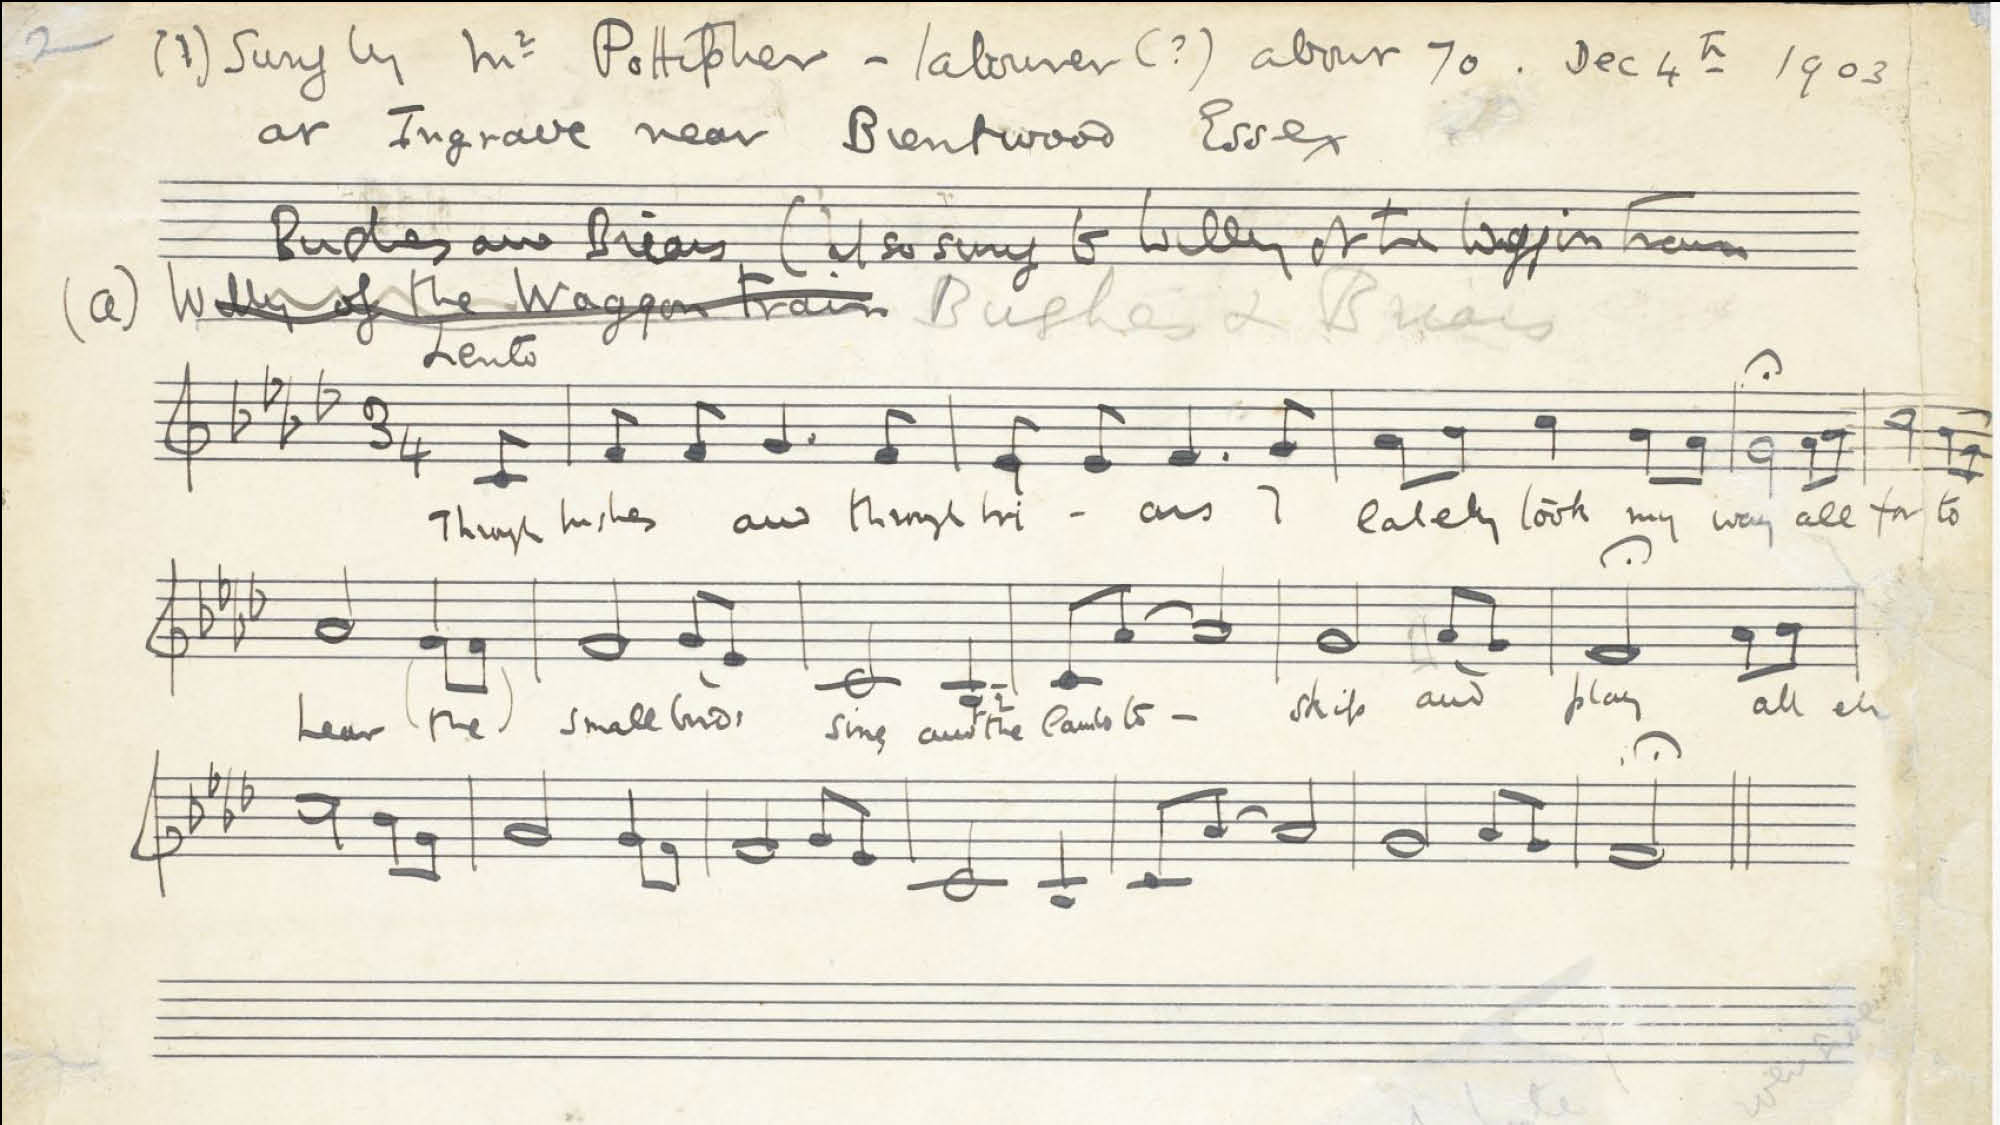 Manuscript showing music and words of Bushes and Briars, courtesy of Vaughan Williams Charitable Trust